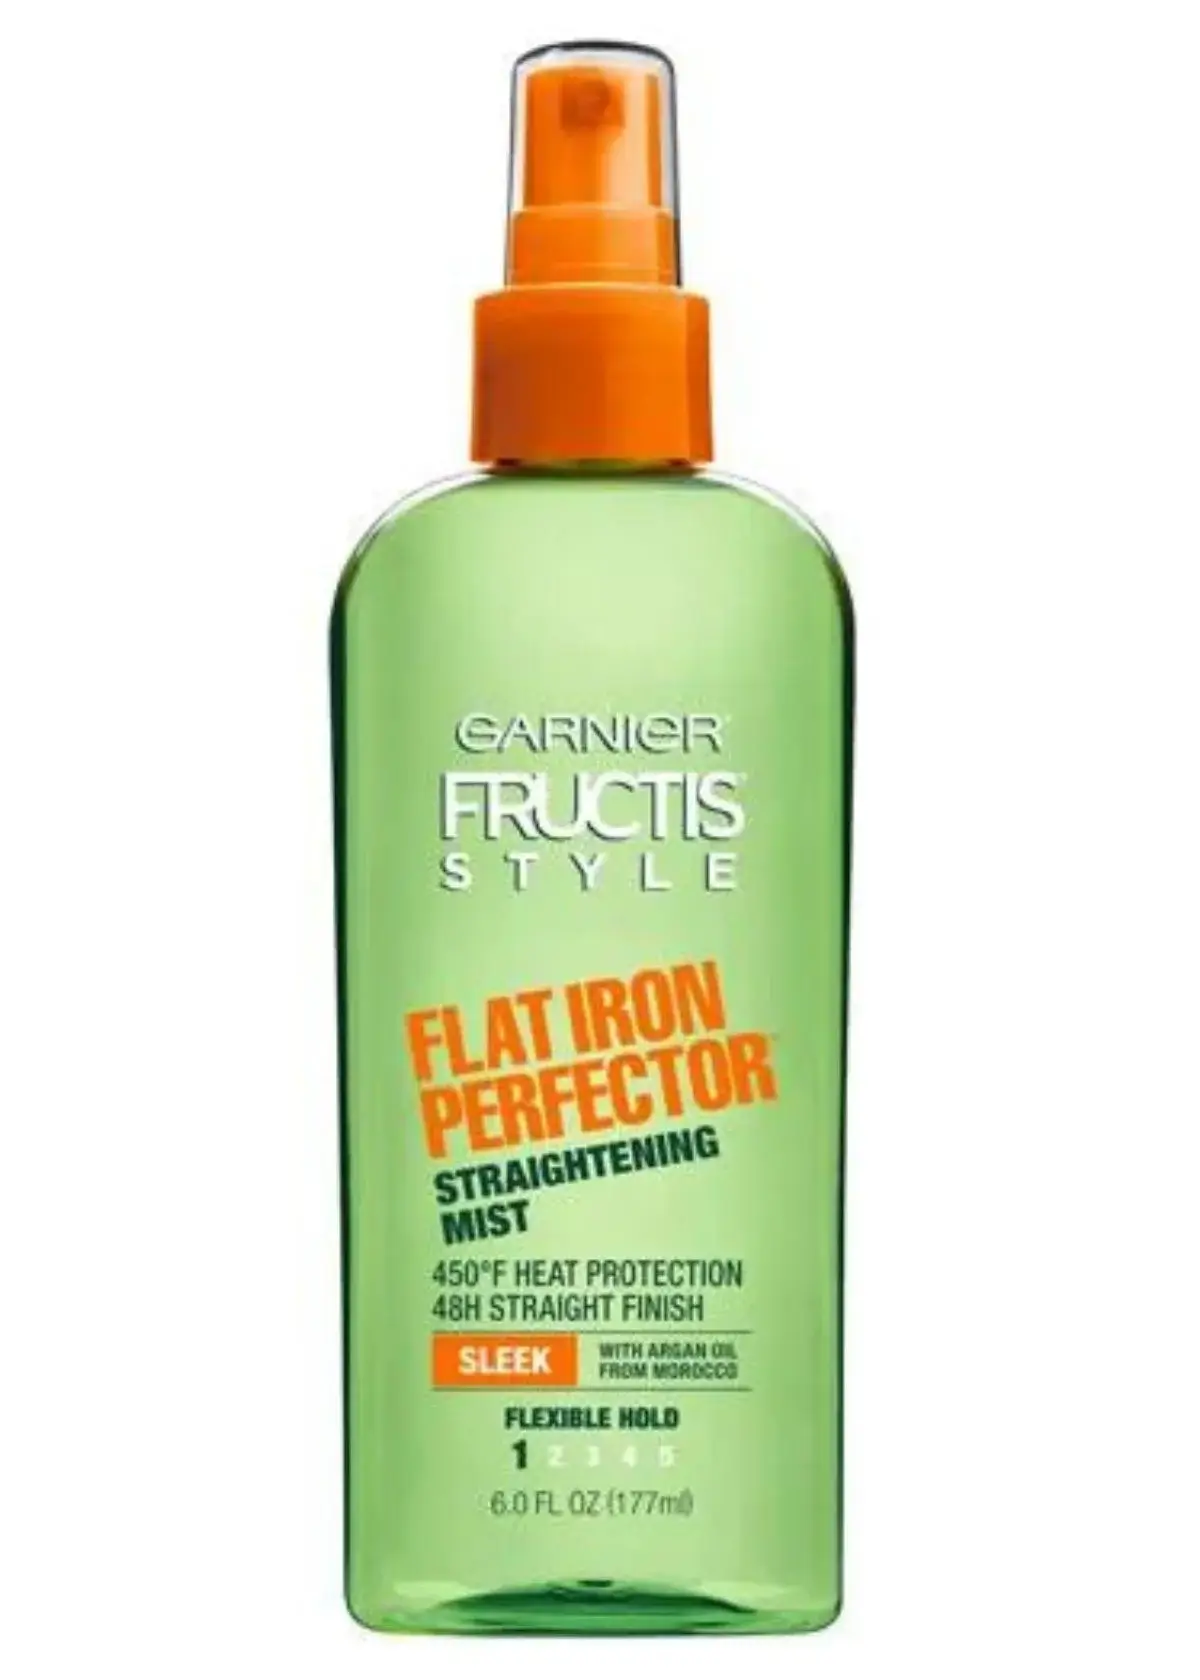 How to choose the right heat protectant for curly hair?